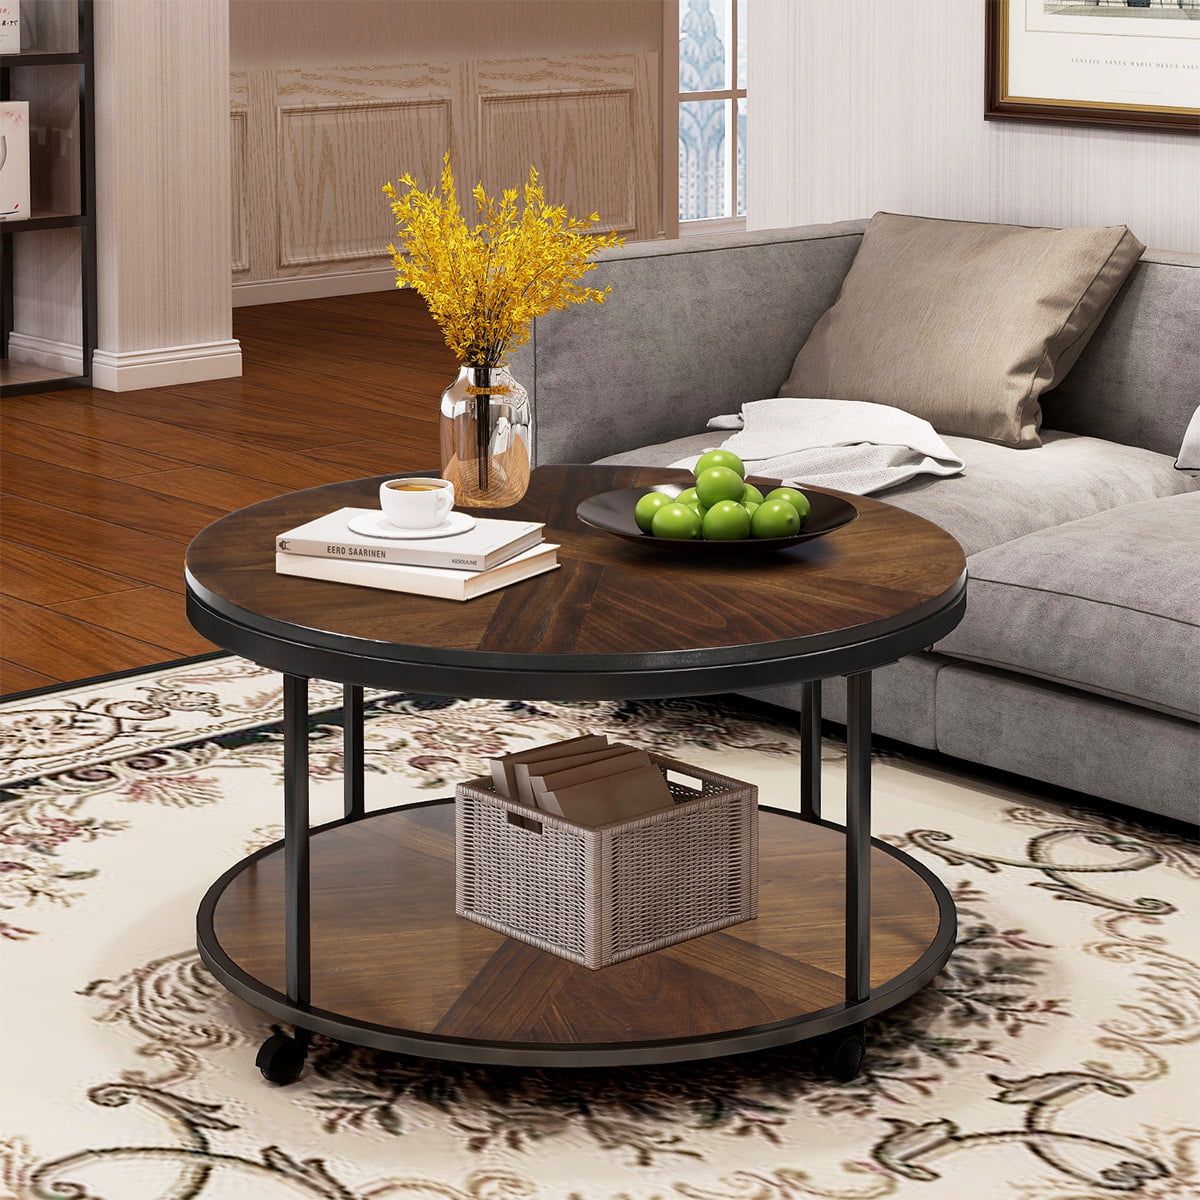 Sentern Round Coffee Table With Caster Wheels And Unique Textured Regarding Round Coffee Tables (View 3 of 20)